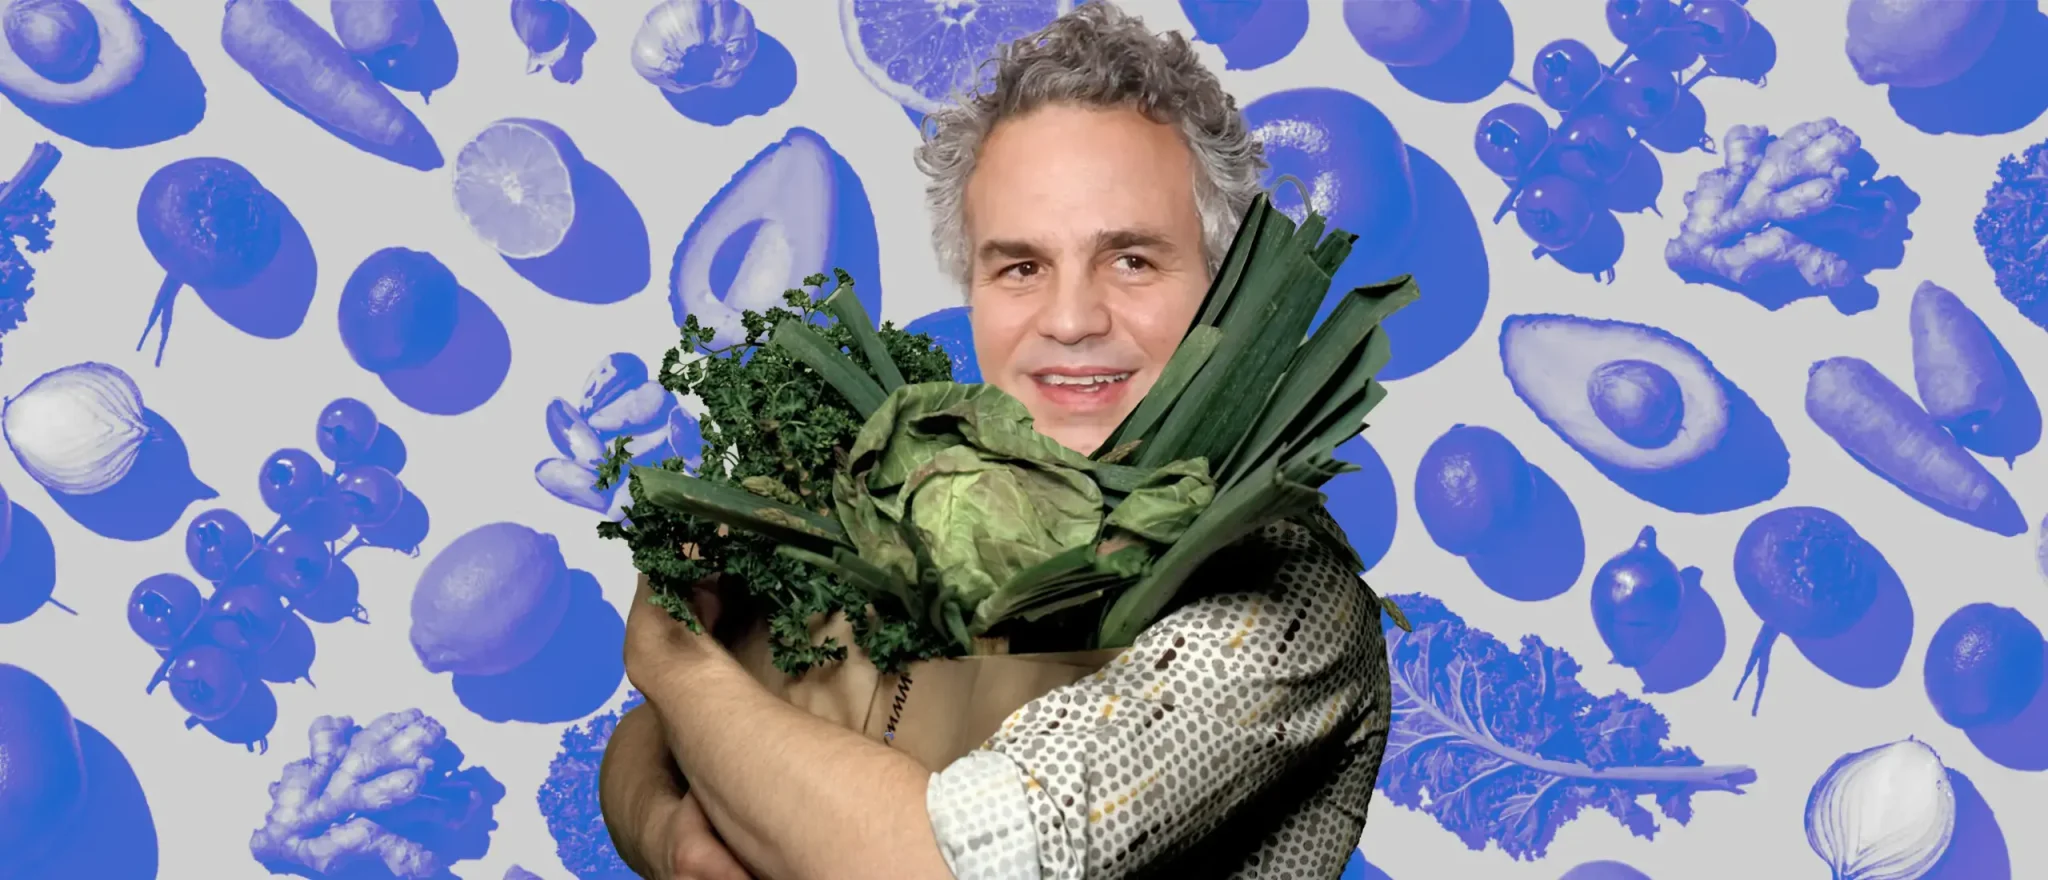 Mark Ruffalo Is Vegan. Here’s Why You Should Consider Eating Less Meat, Too